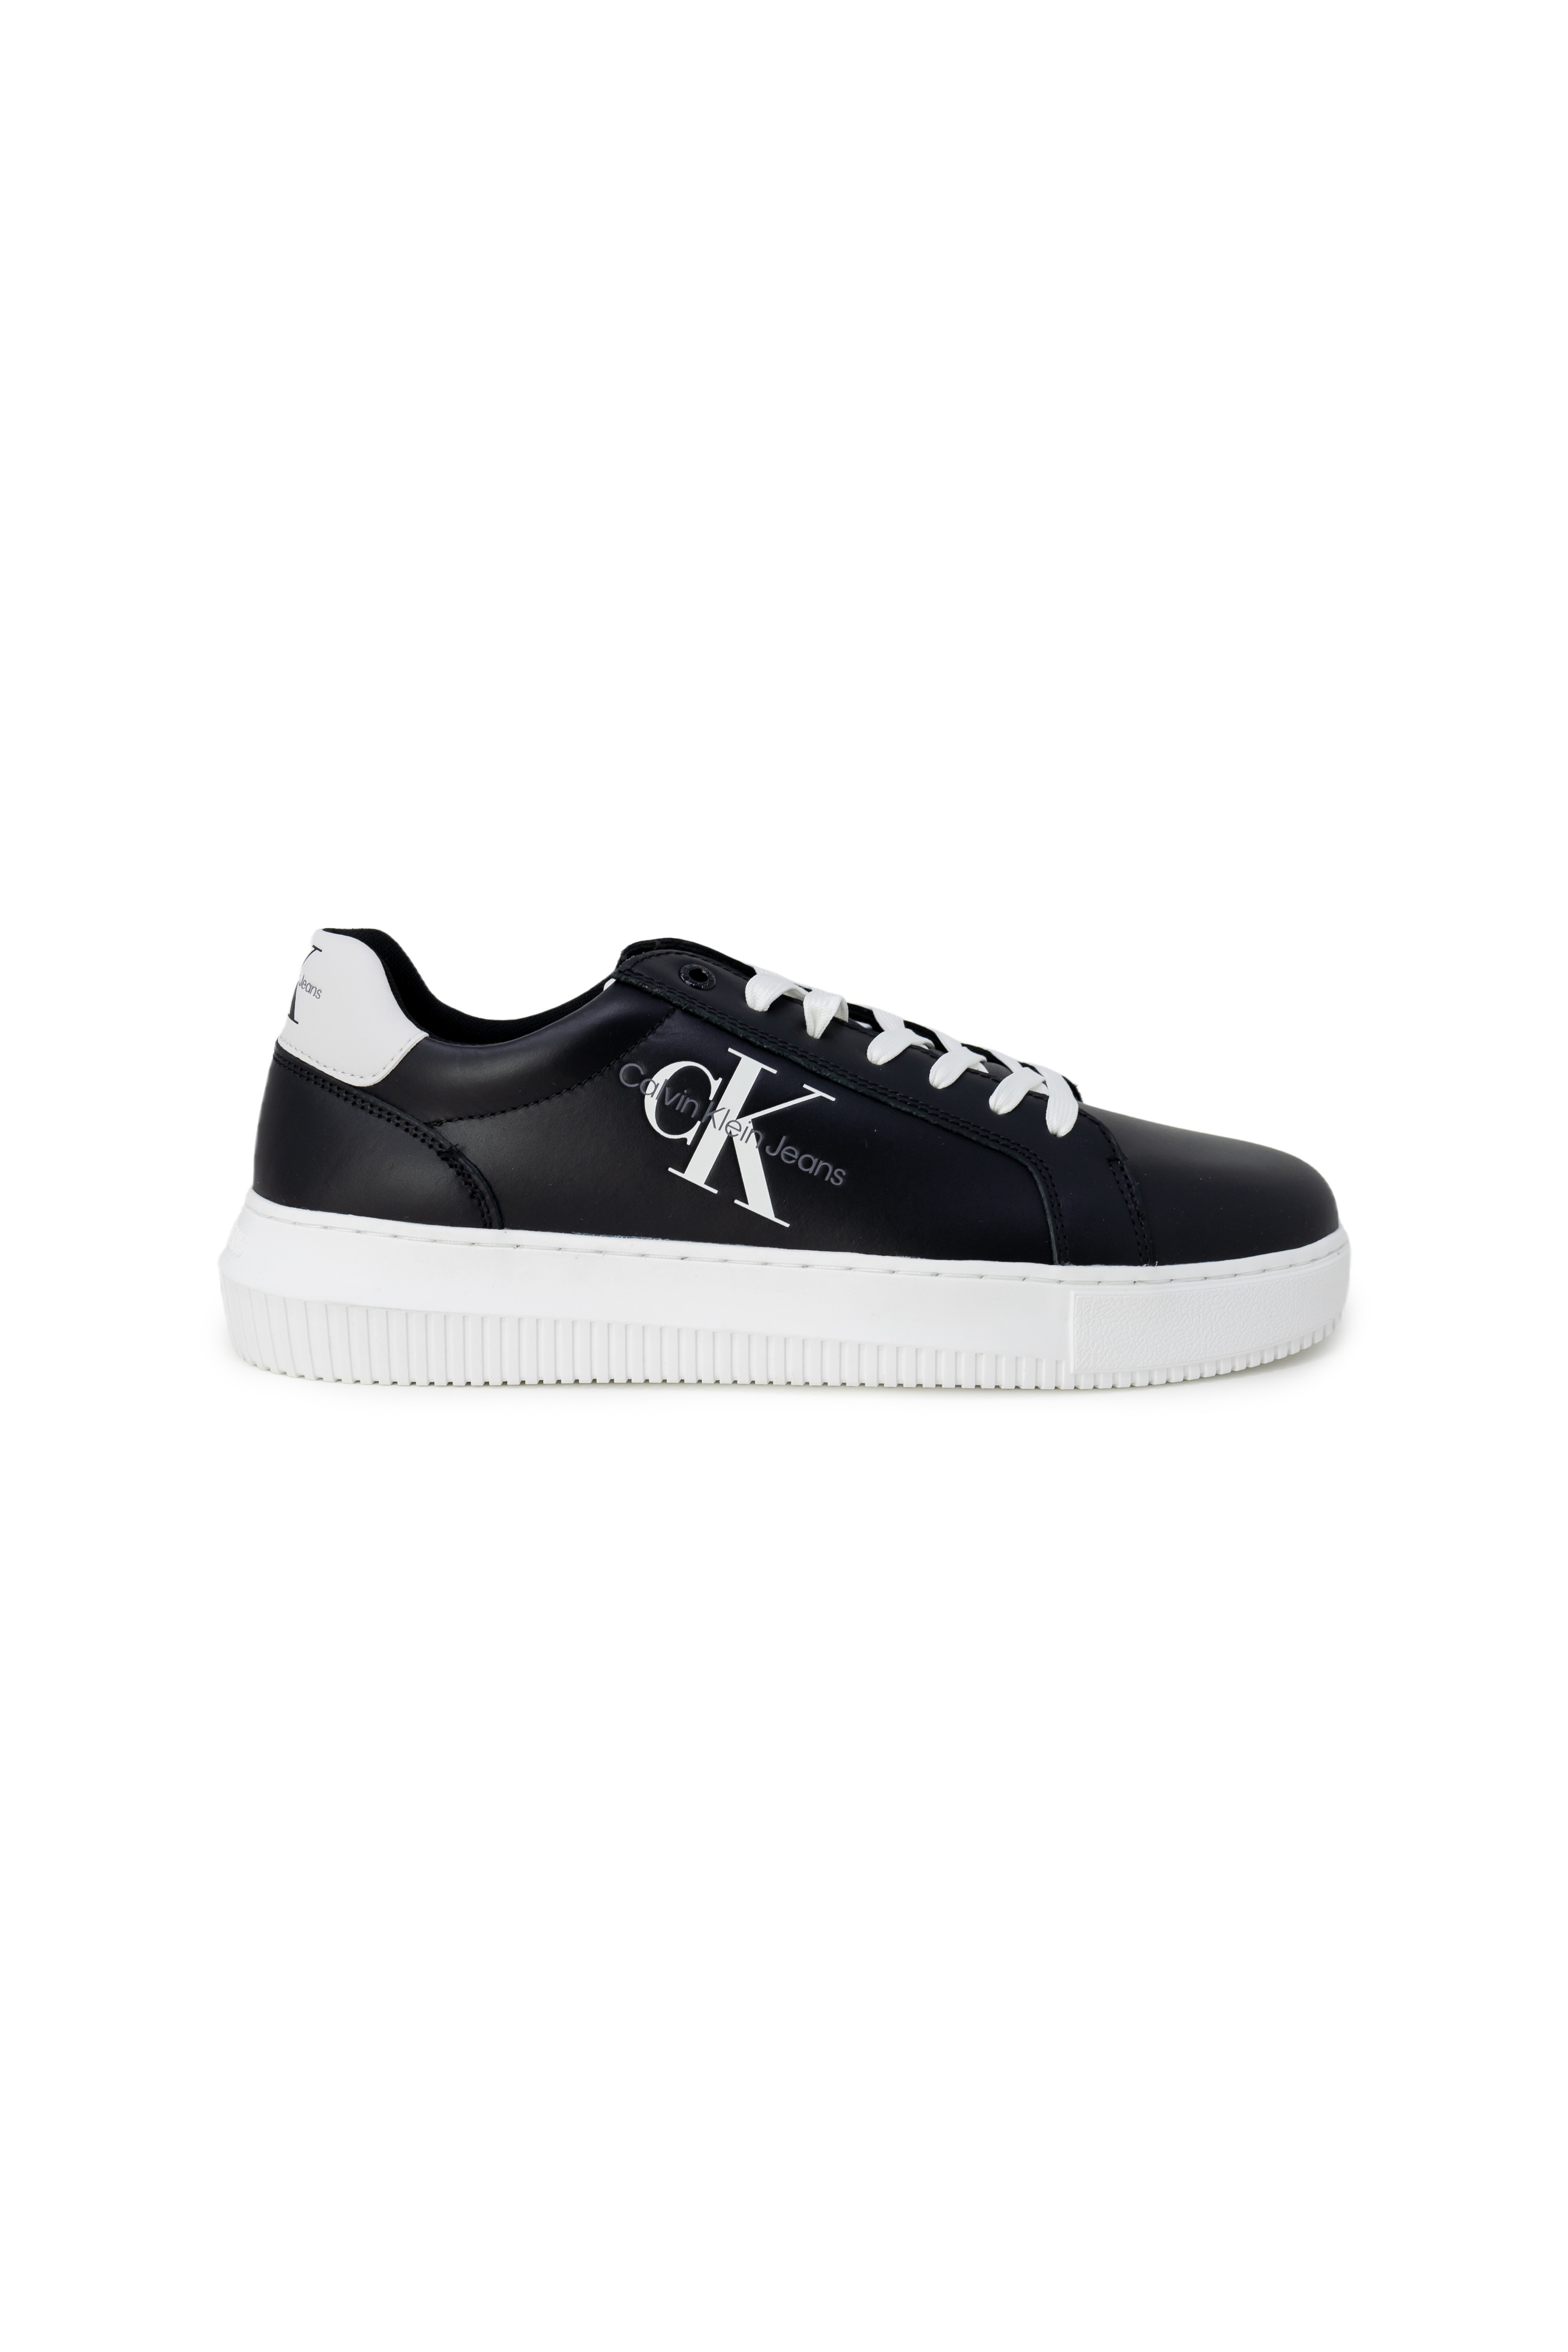 Mens Leather Sneakers by Calvin Klein Jeans